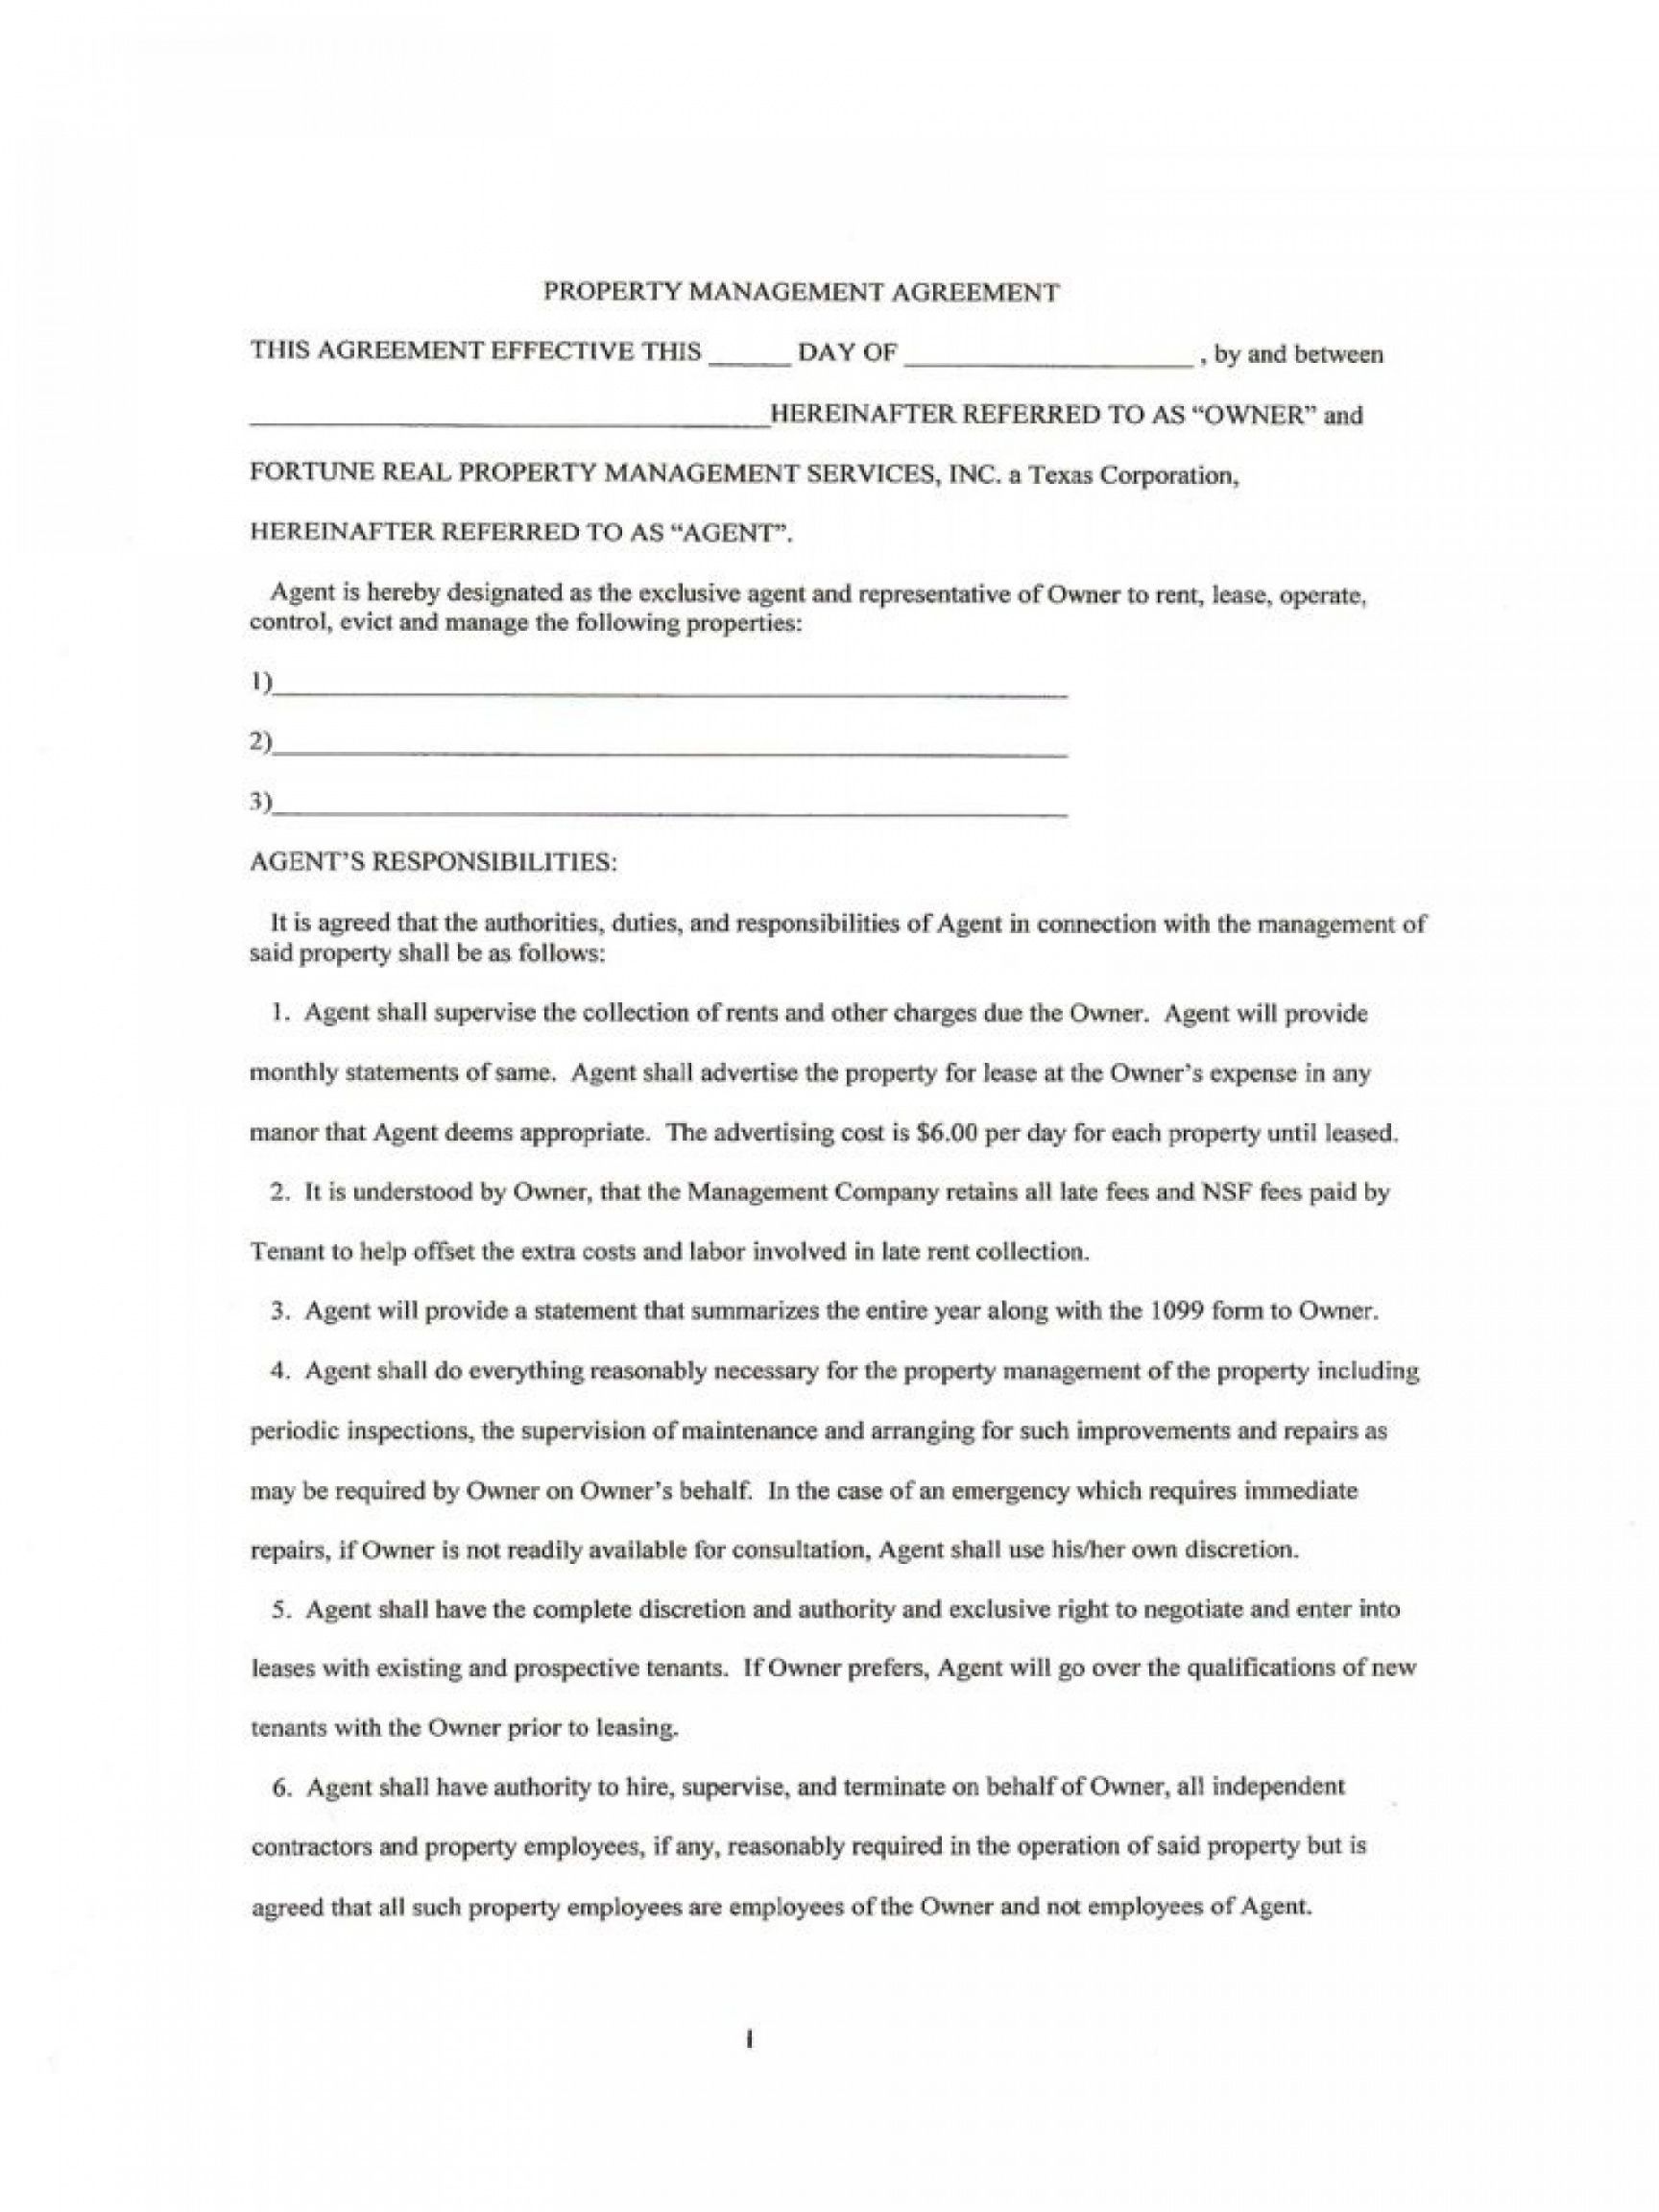 free property management agreement template ~ addictionary commercial property management agreement template doc